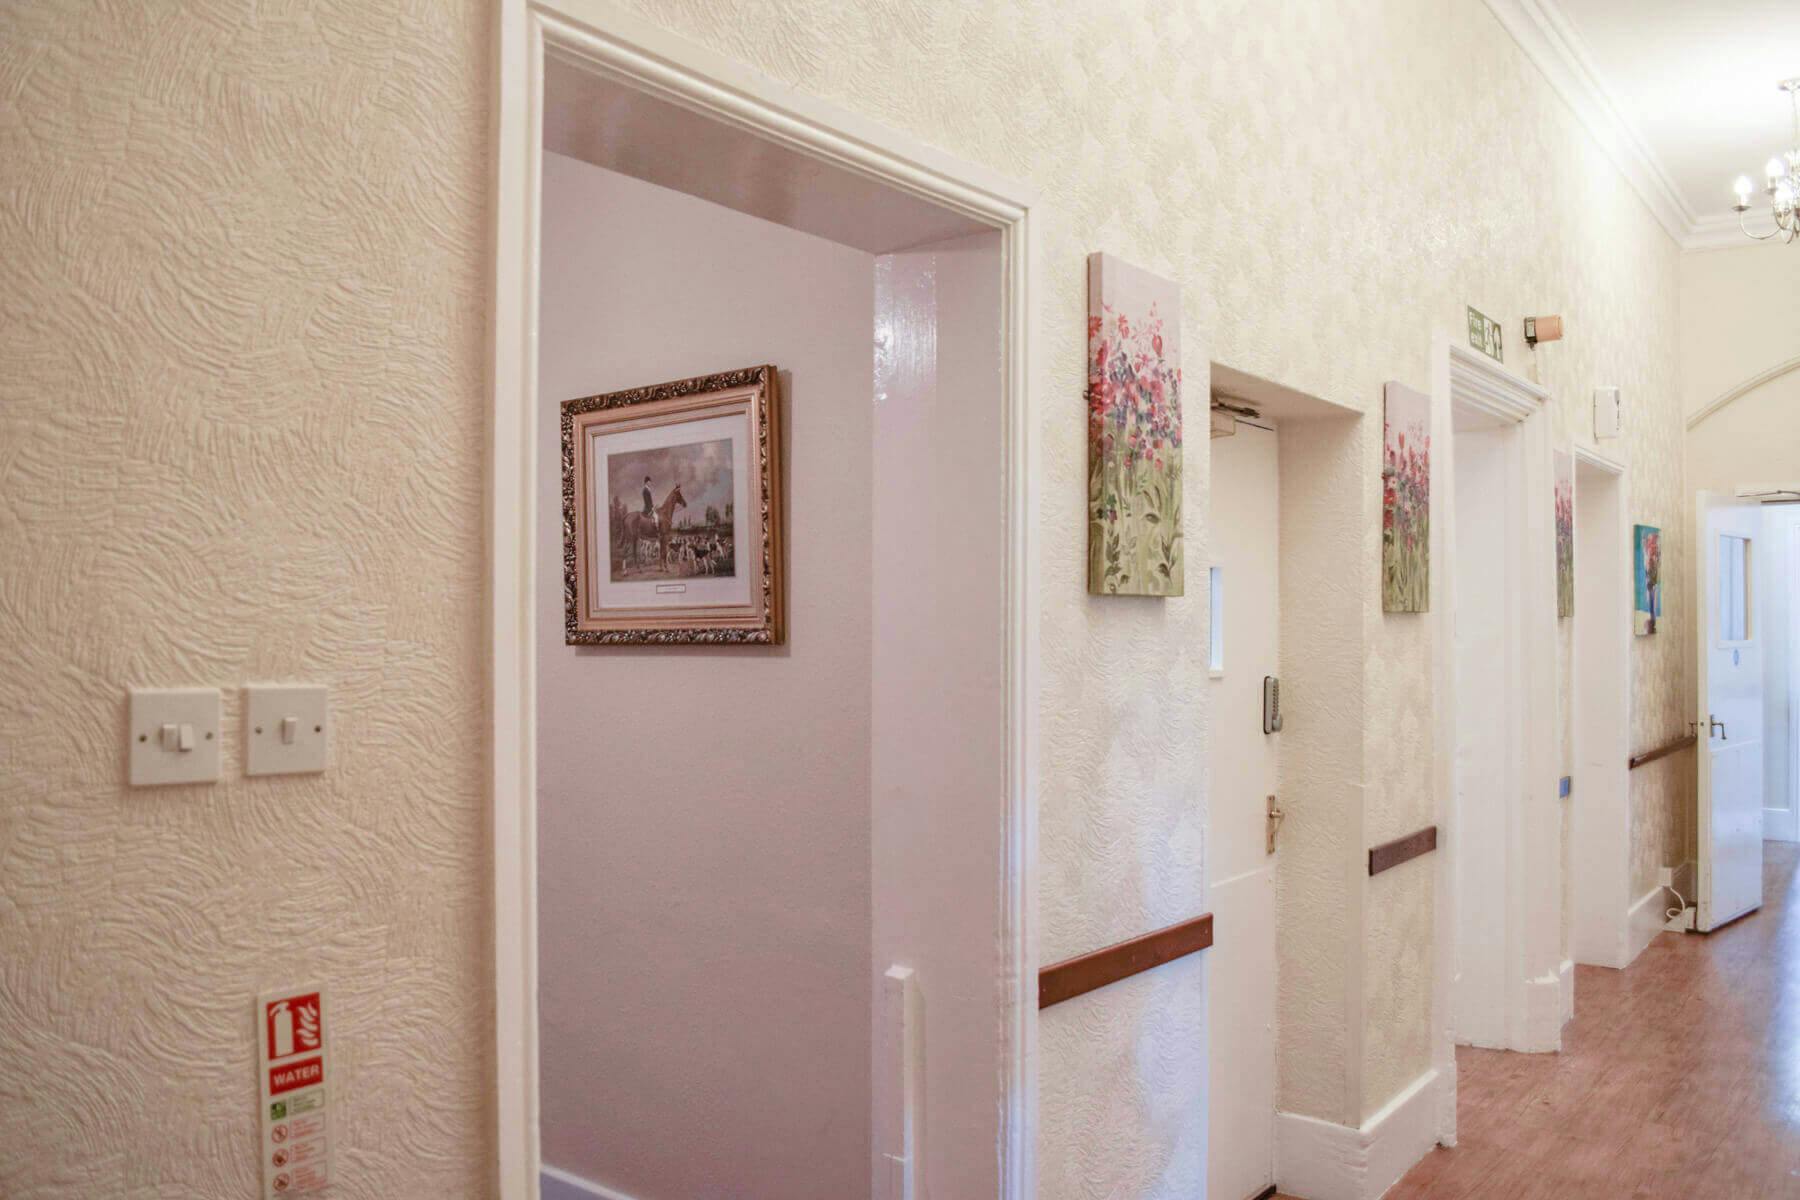 Hallway of Park House care home in Bewdley, West Midlands